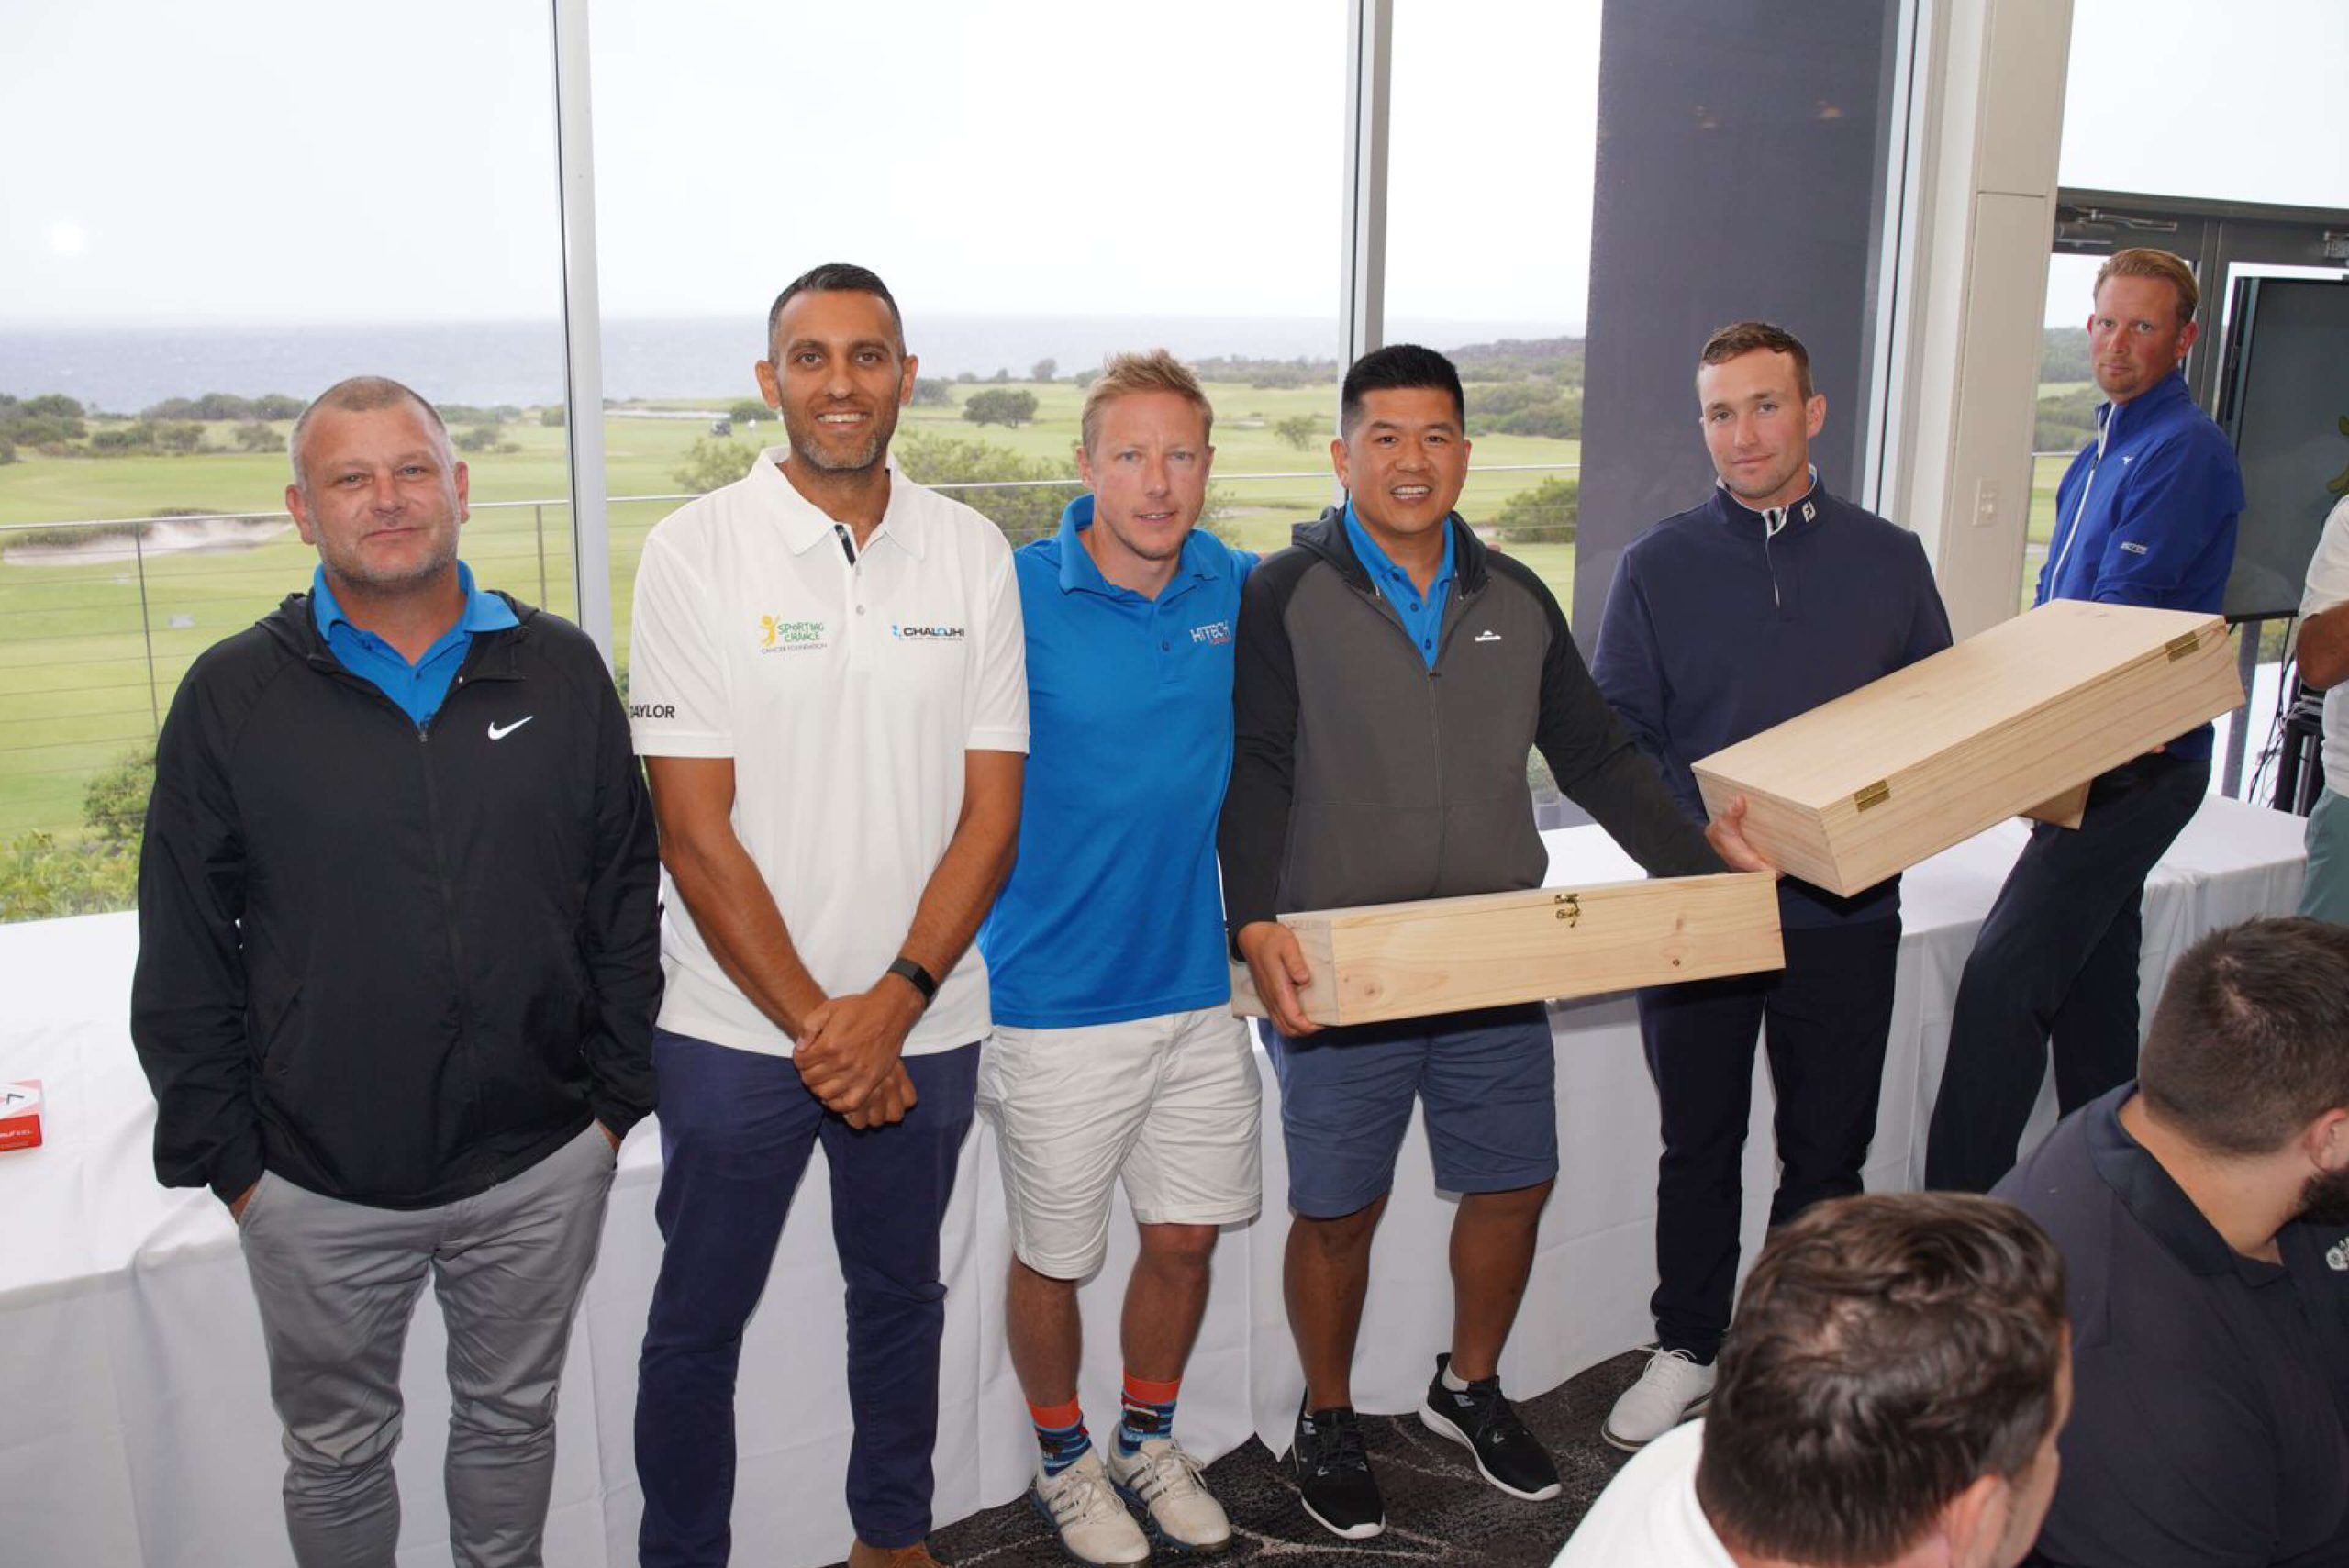 049 major sponsor chalouhi with tournament winners hitech plumbing taylor charity golf day 2023